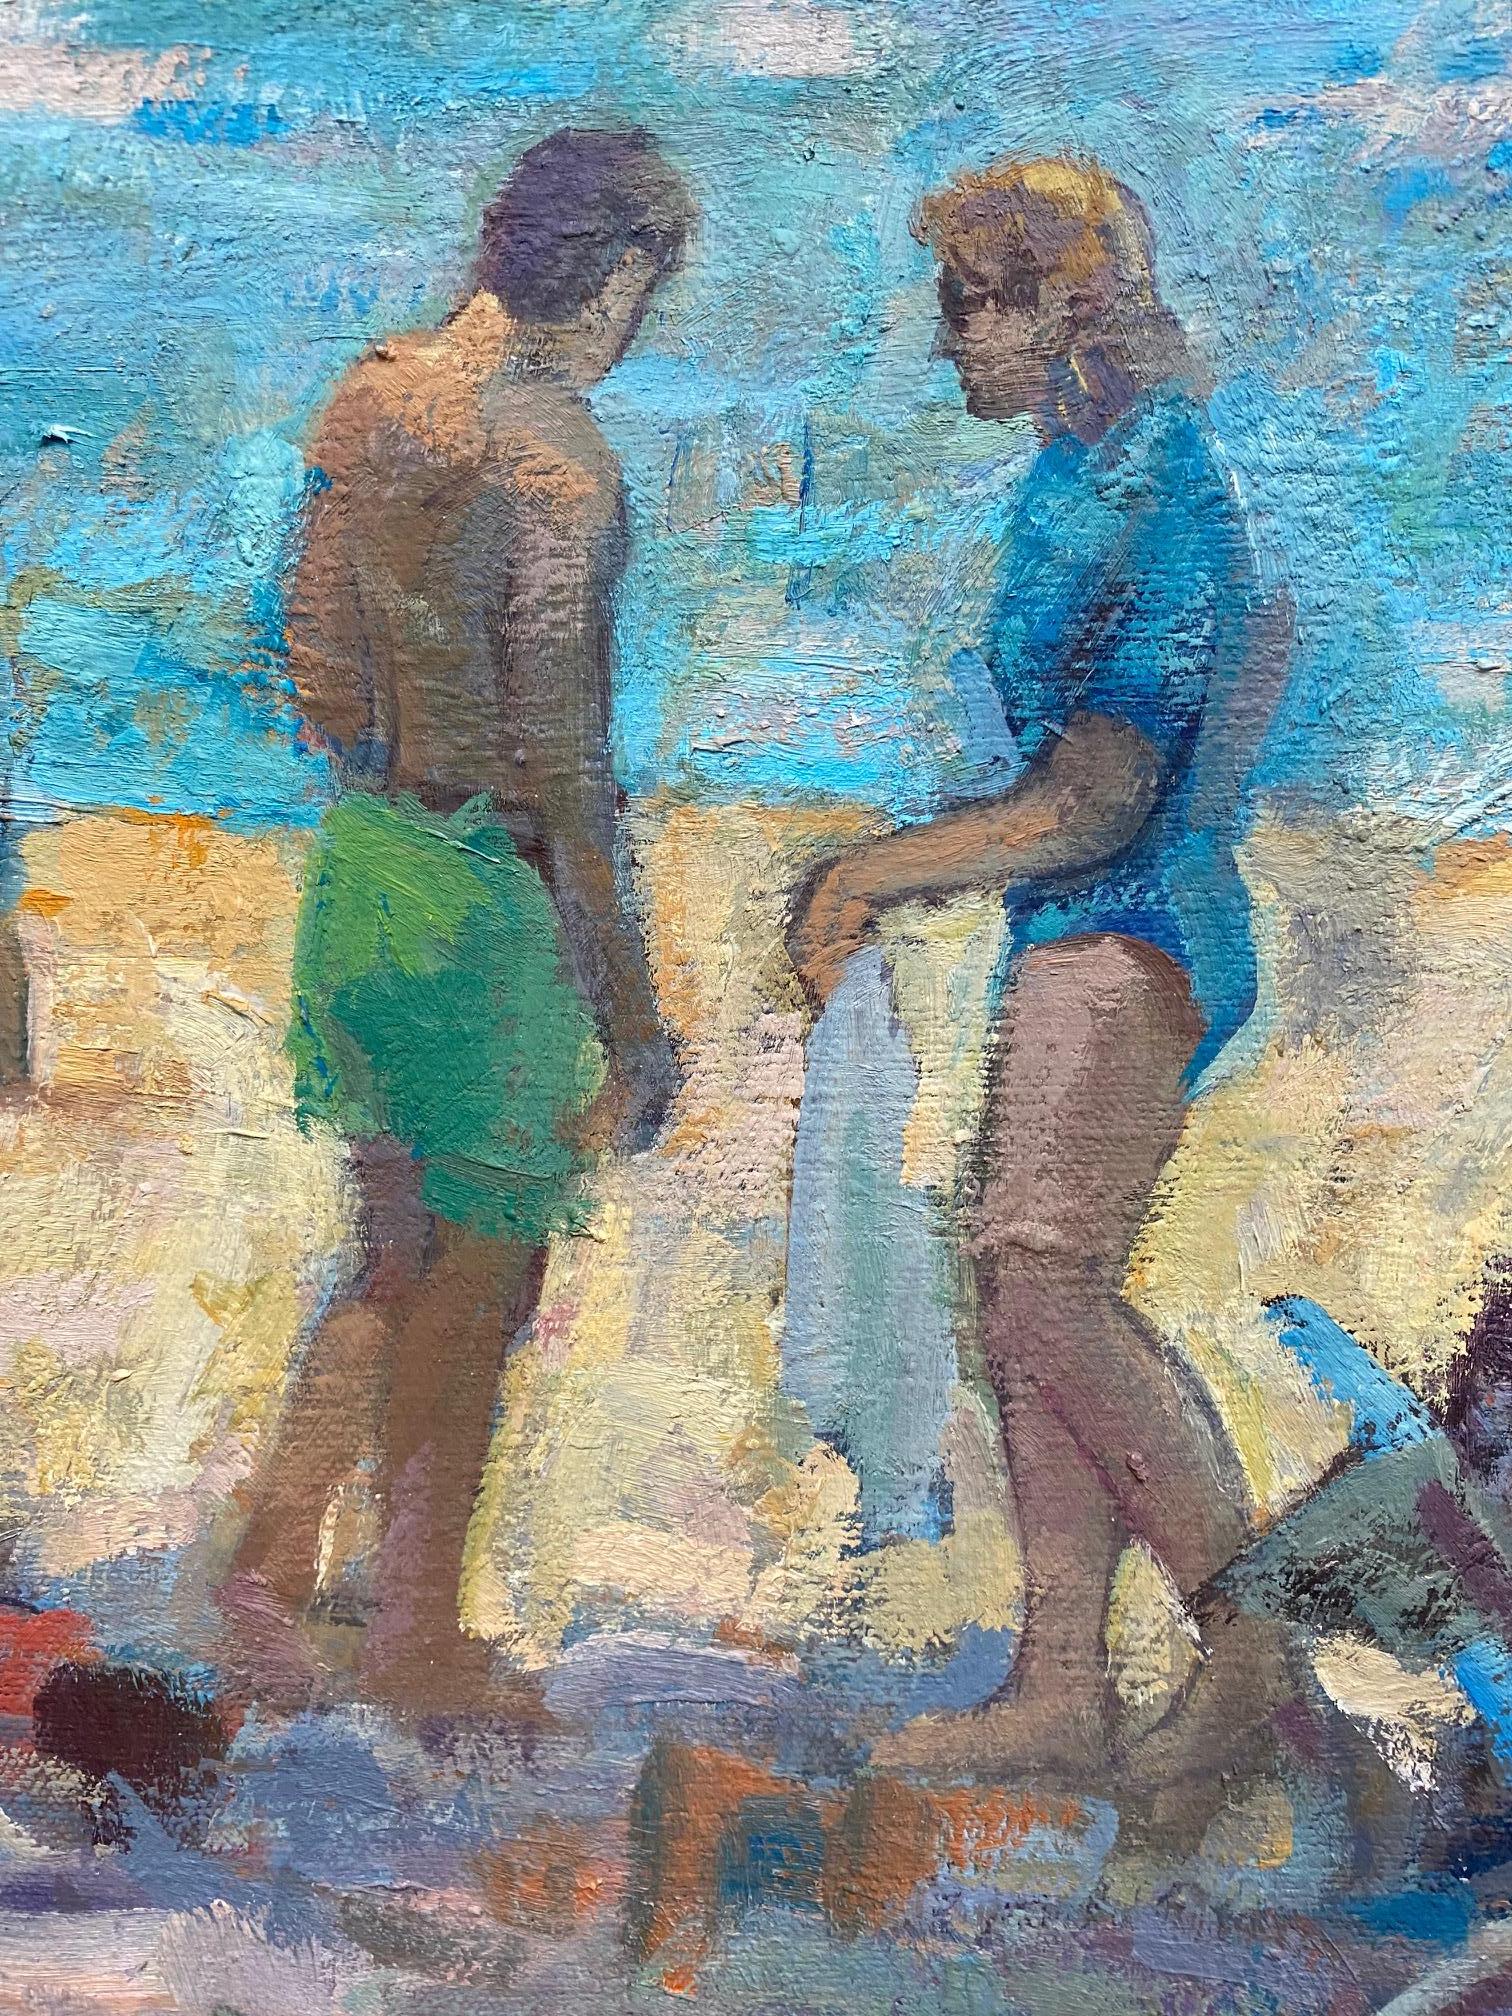 Another Day at the Beach, paysage marin figuratif original 20x30 en vente 1